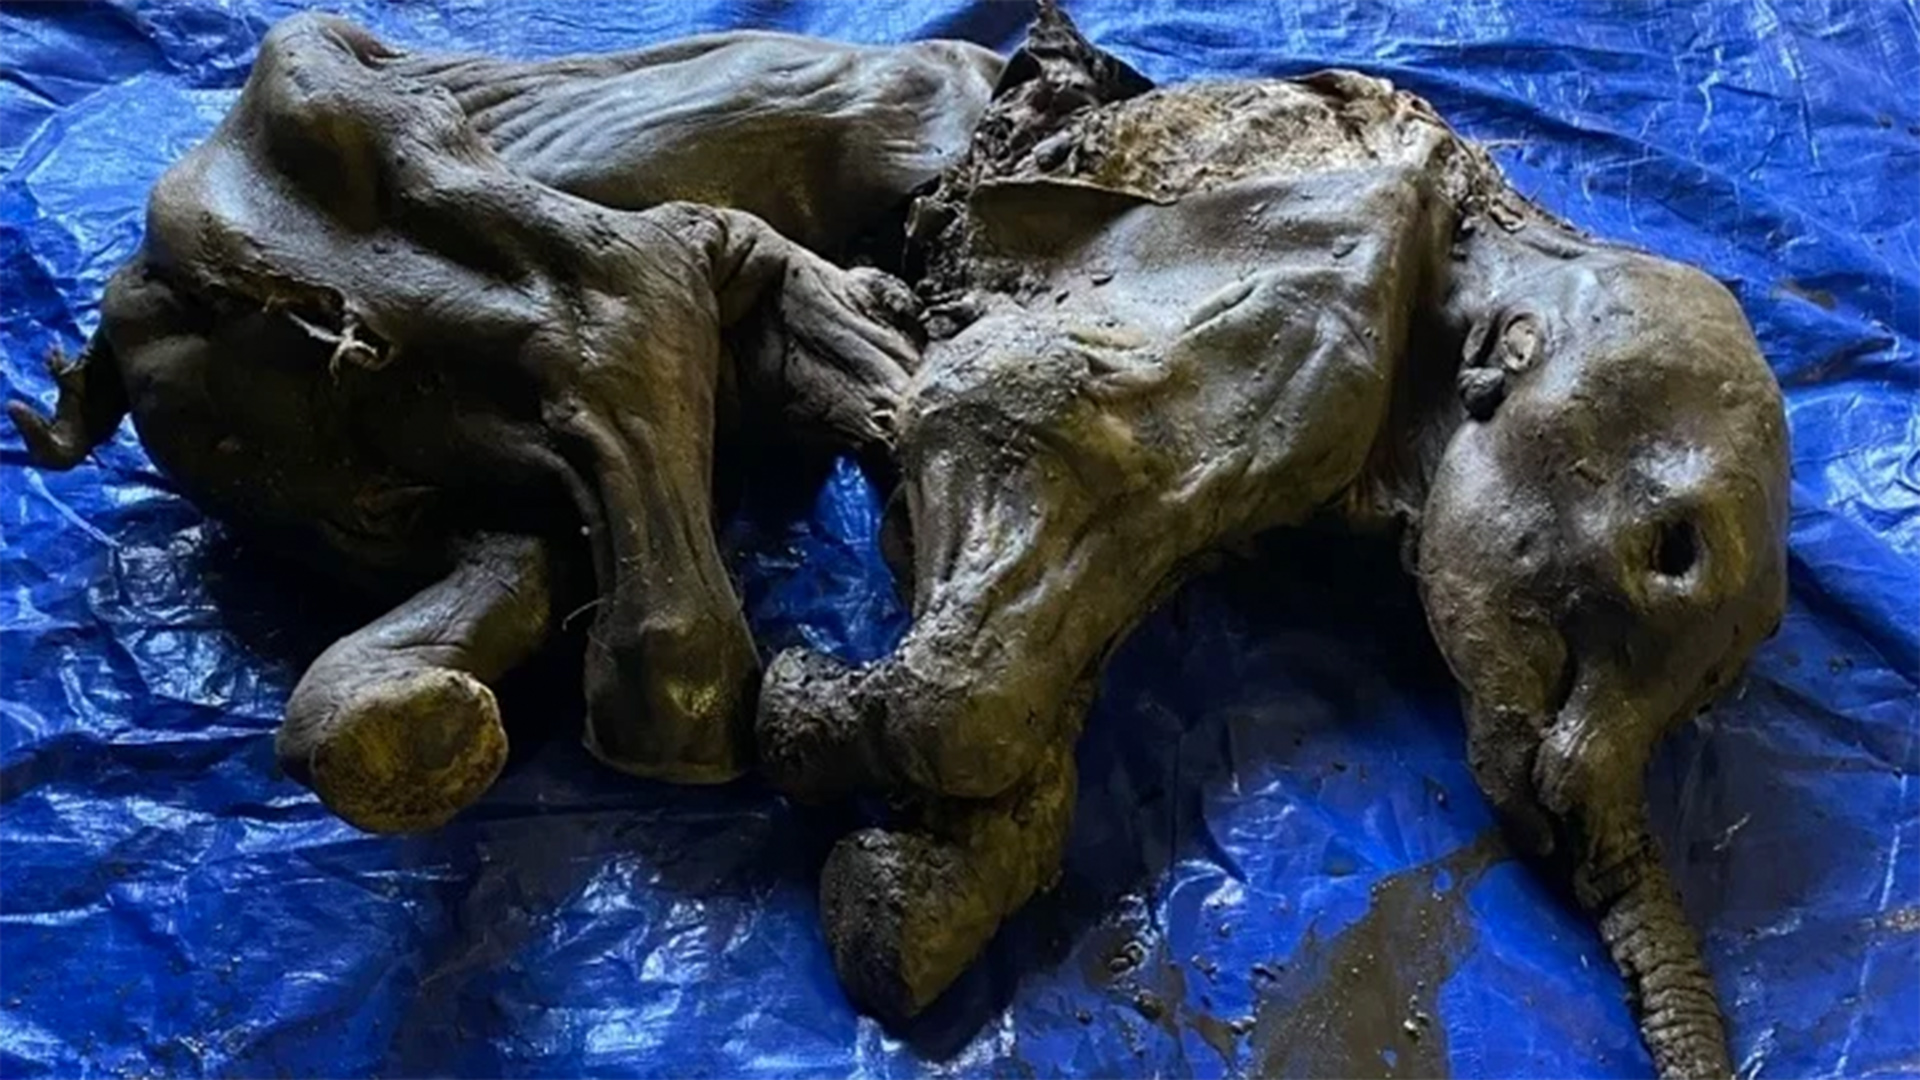 A woolly mammoth calf, believed to be female, was found in Canada's Yukon territory buried in ancestral land of the Trʼondëk Hwëchʼin, whose elders named her Nun cho ga, which means "big baby animal" in the Hän language.